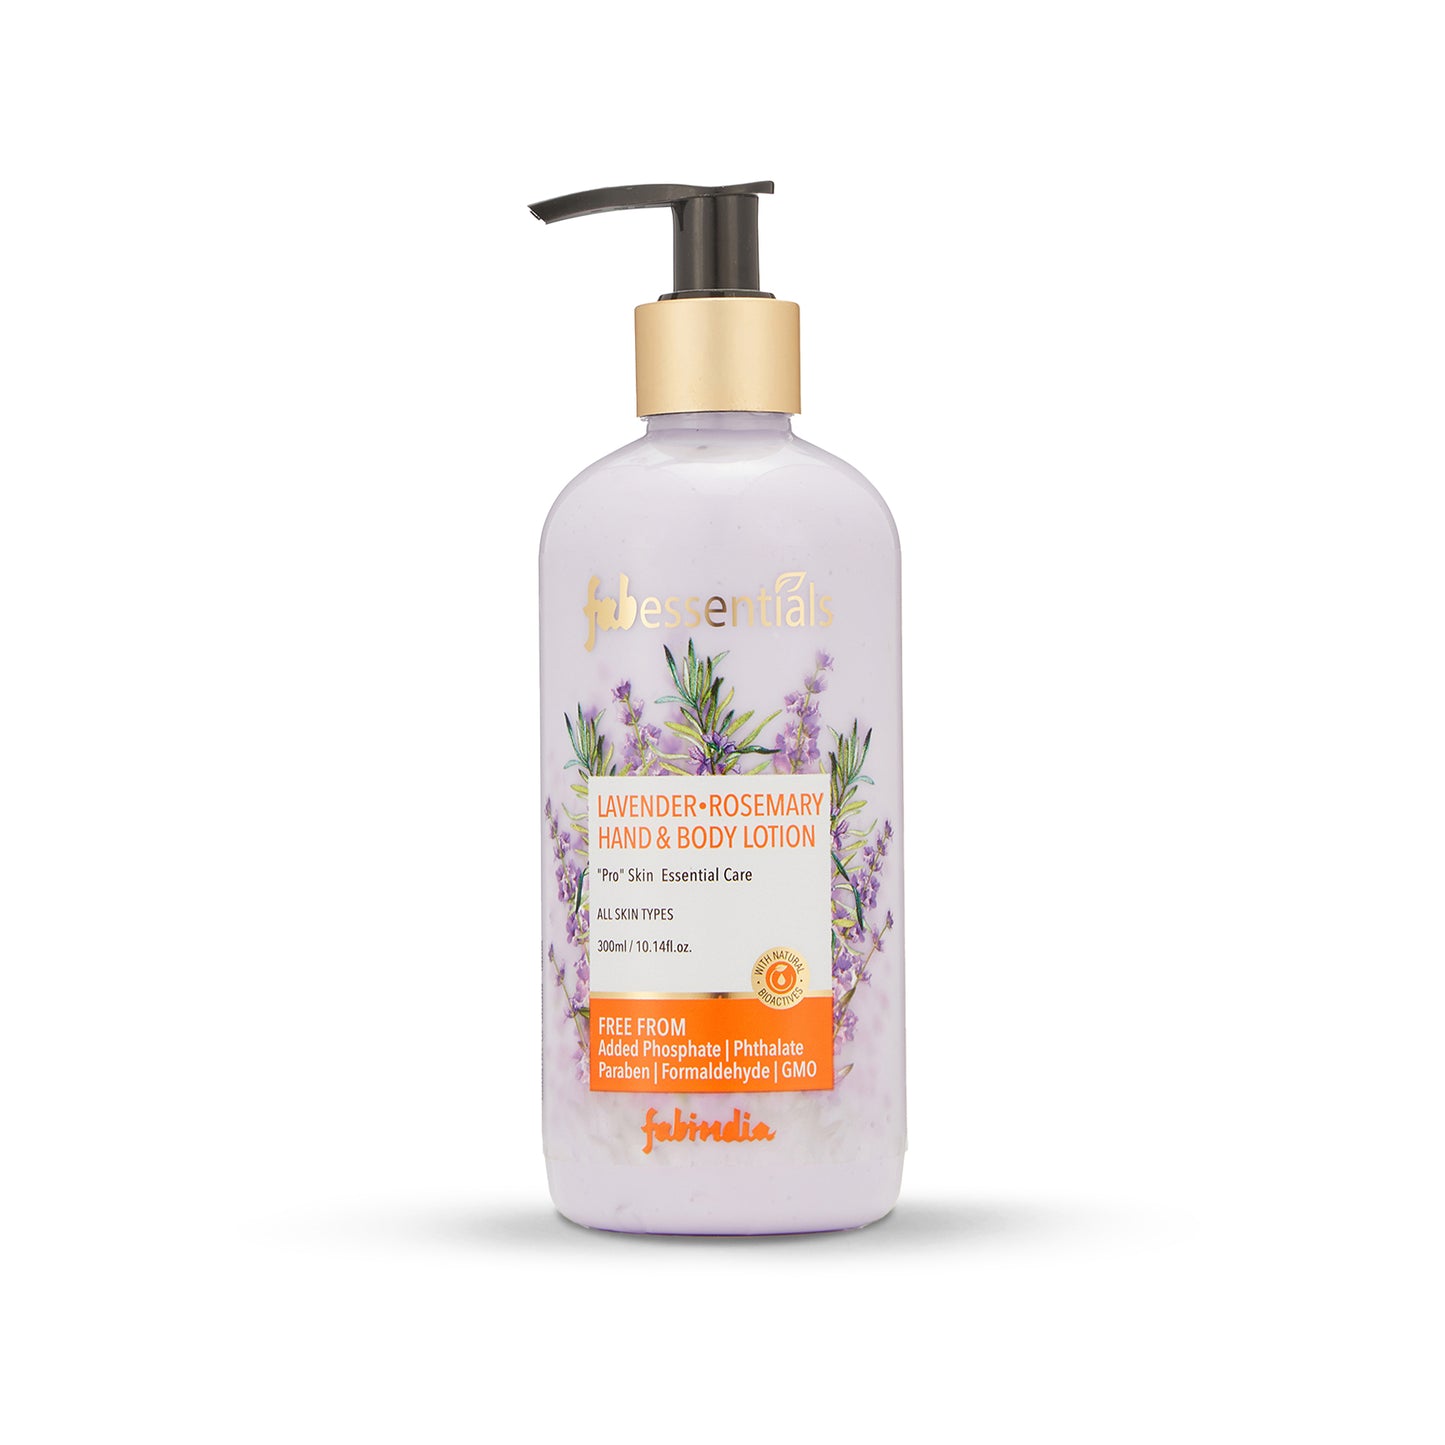 Fabessentials Lavender Rosemary Hand & Body Lotion, 300ml